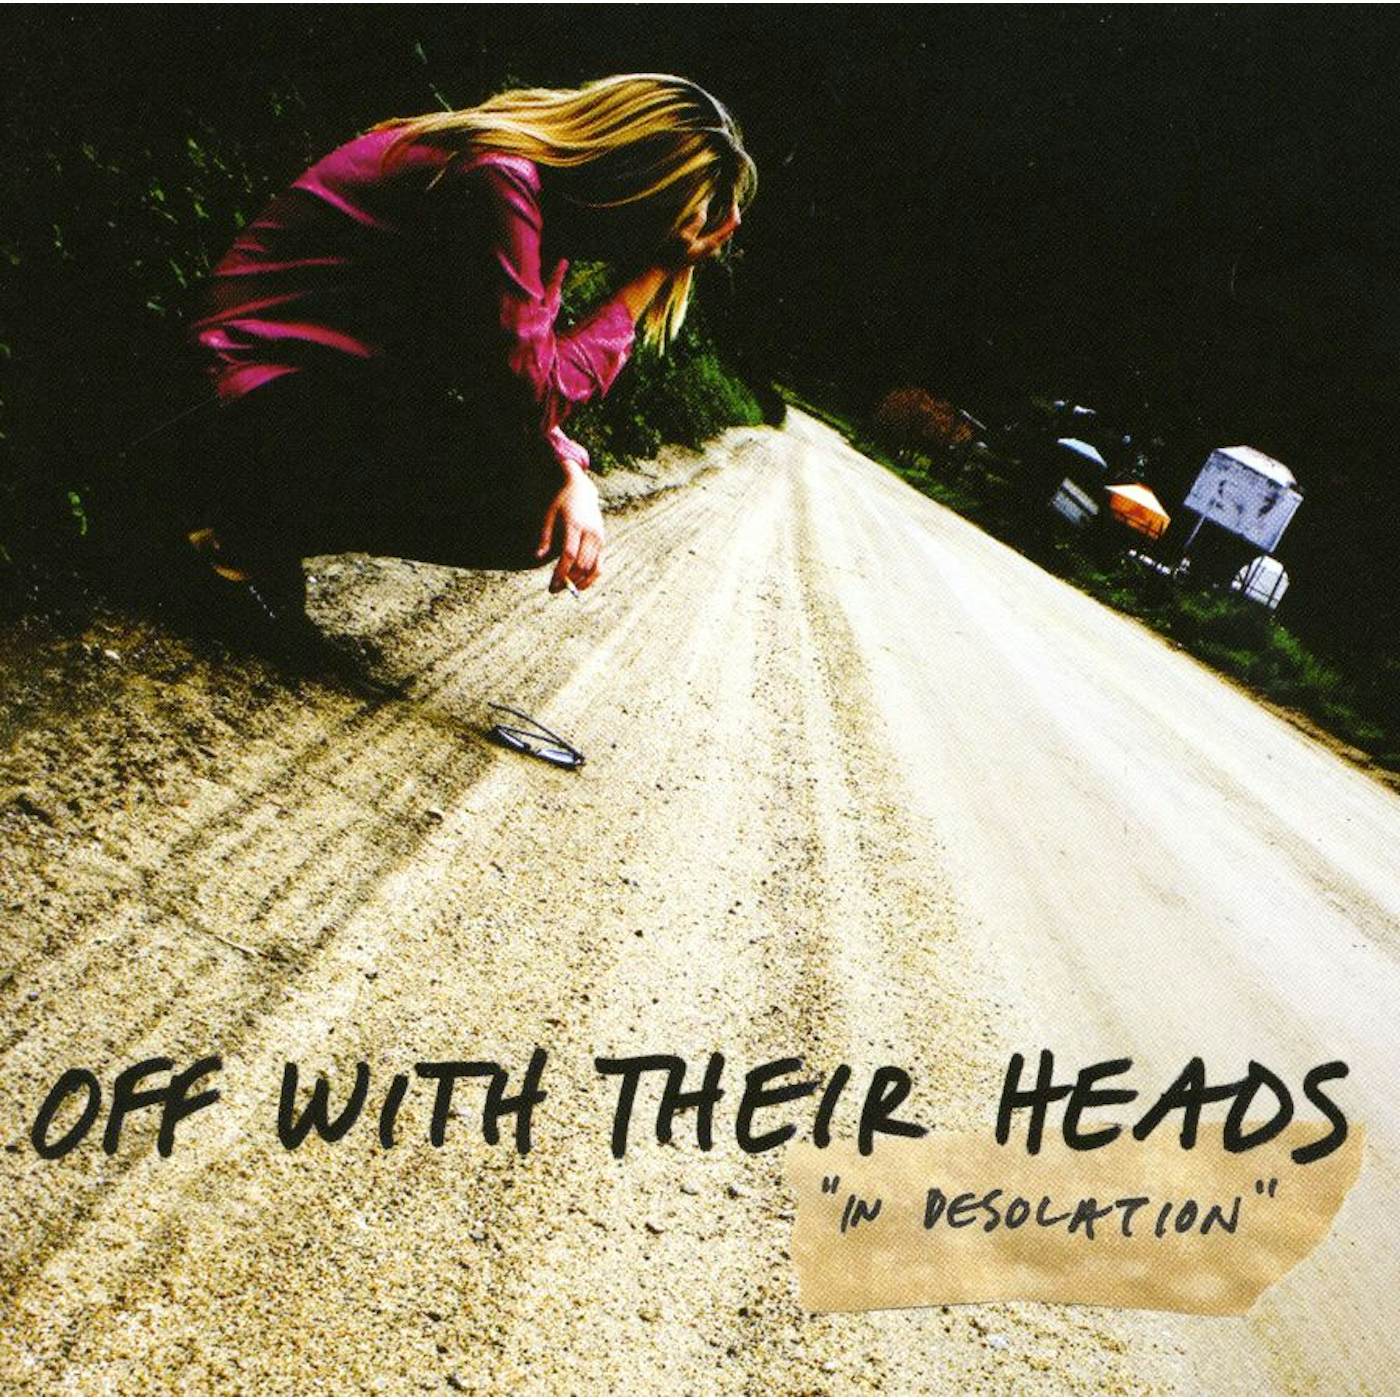 Off With Their Heads IN DESOLATION CD